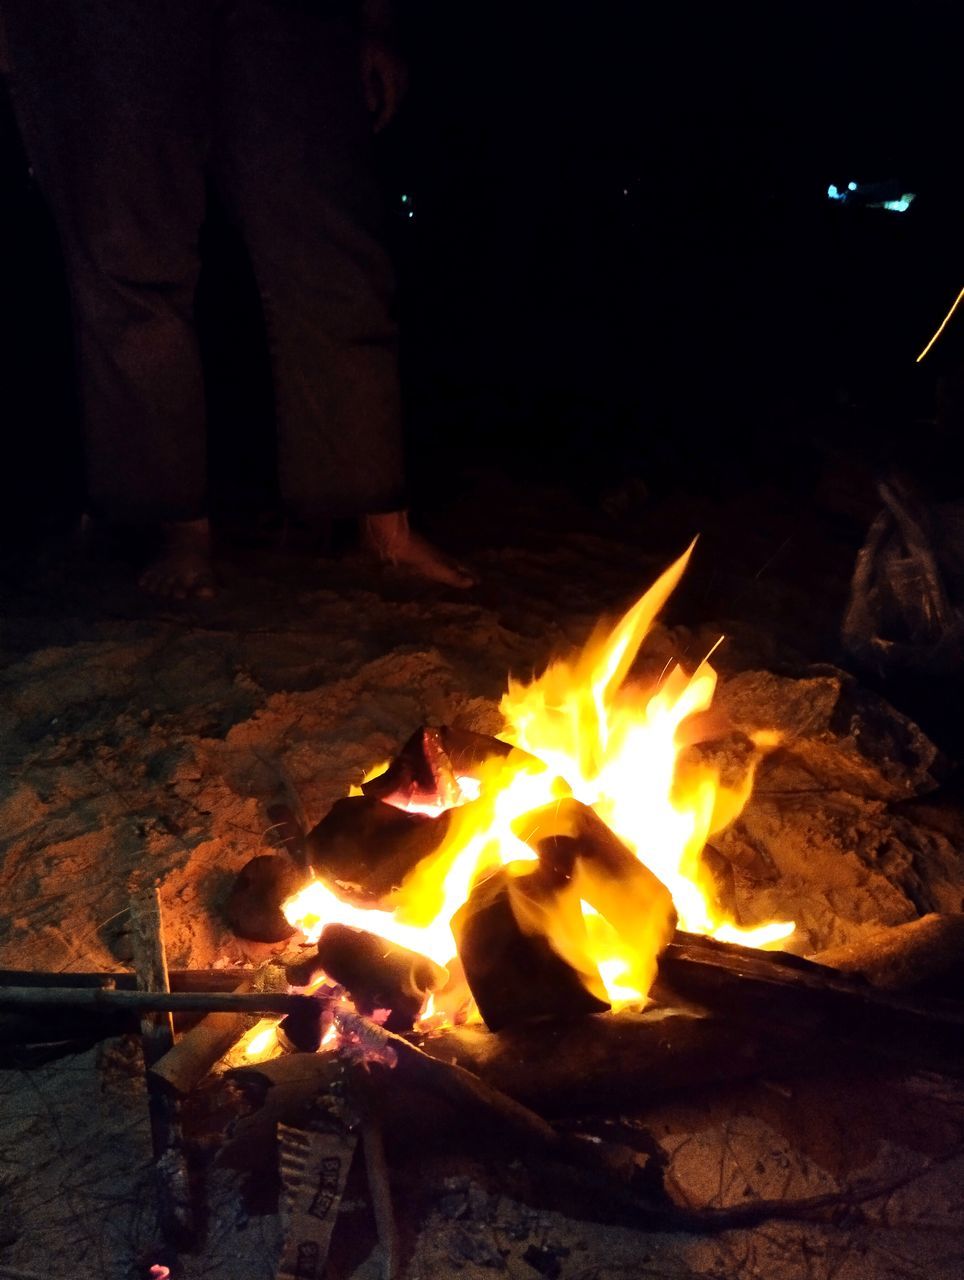 campfire, fire, burning, heat, flame, bonfire, darkness, night, nature, glowing, wood, camping, log, firewood, outdoors